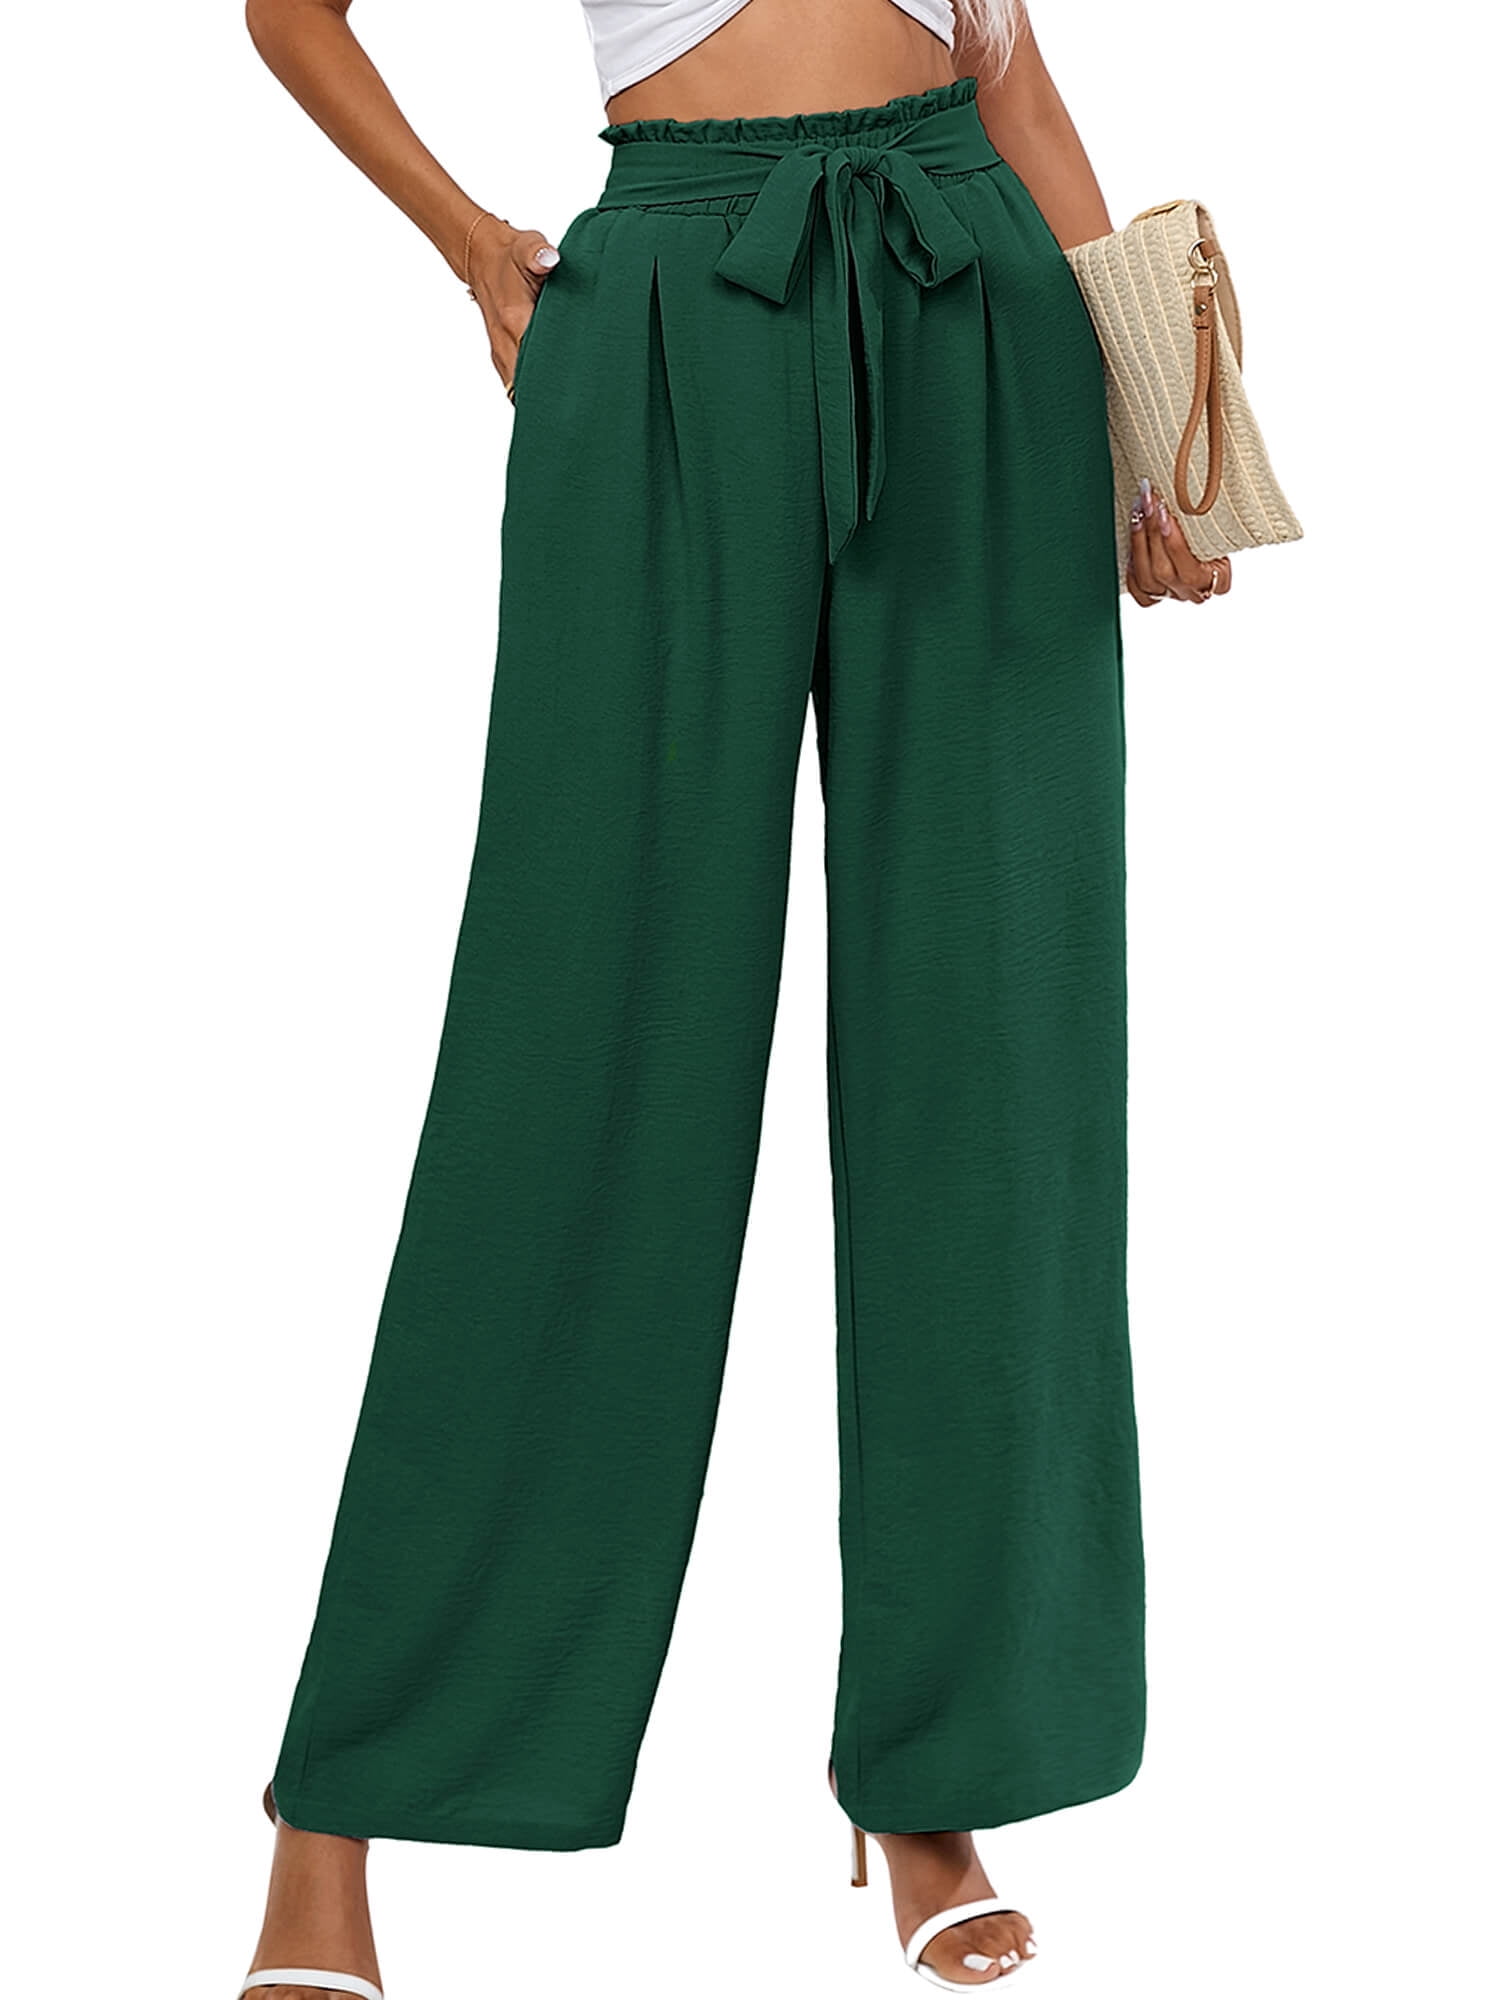 Chiclily Belted Wide Leg Pants for Women High Waisted Business 